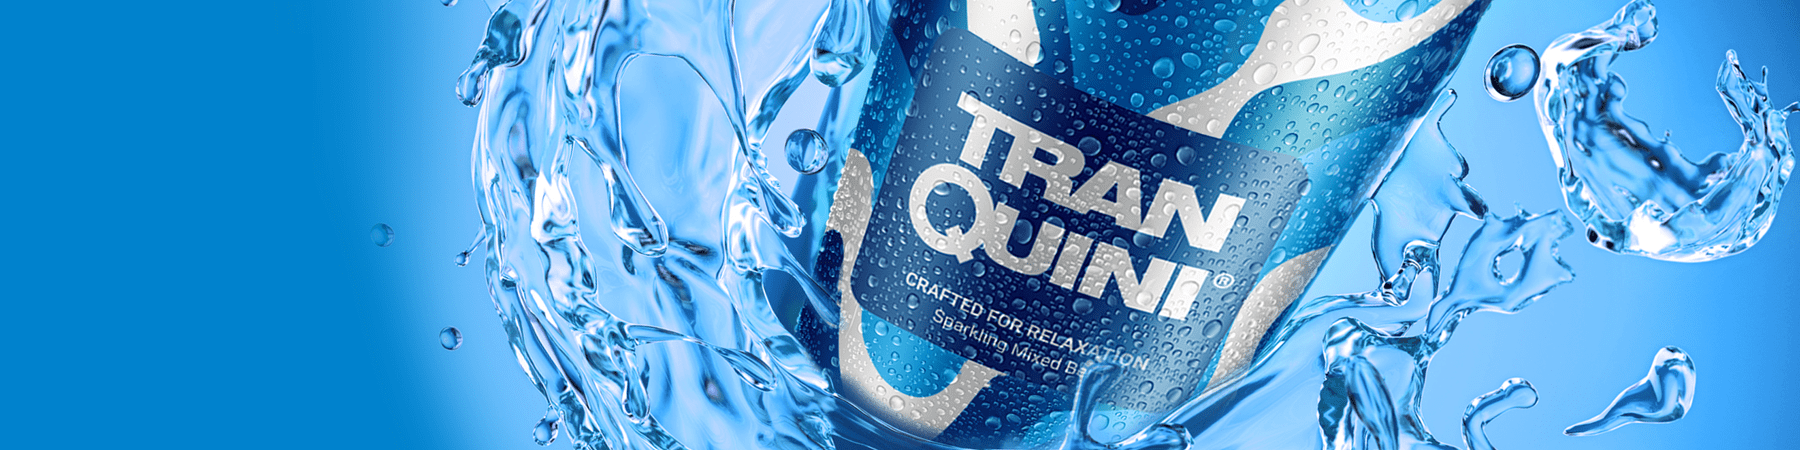 Close-up view of a blue can with "TRANQUINI" printed on it, featuring the tantalizing flavor of mixed berries. The can appears to be splashing in water droplets against a blue background, evoking a sense of refreshing tranquility.